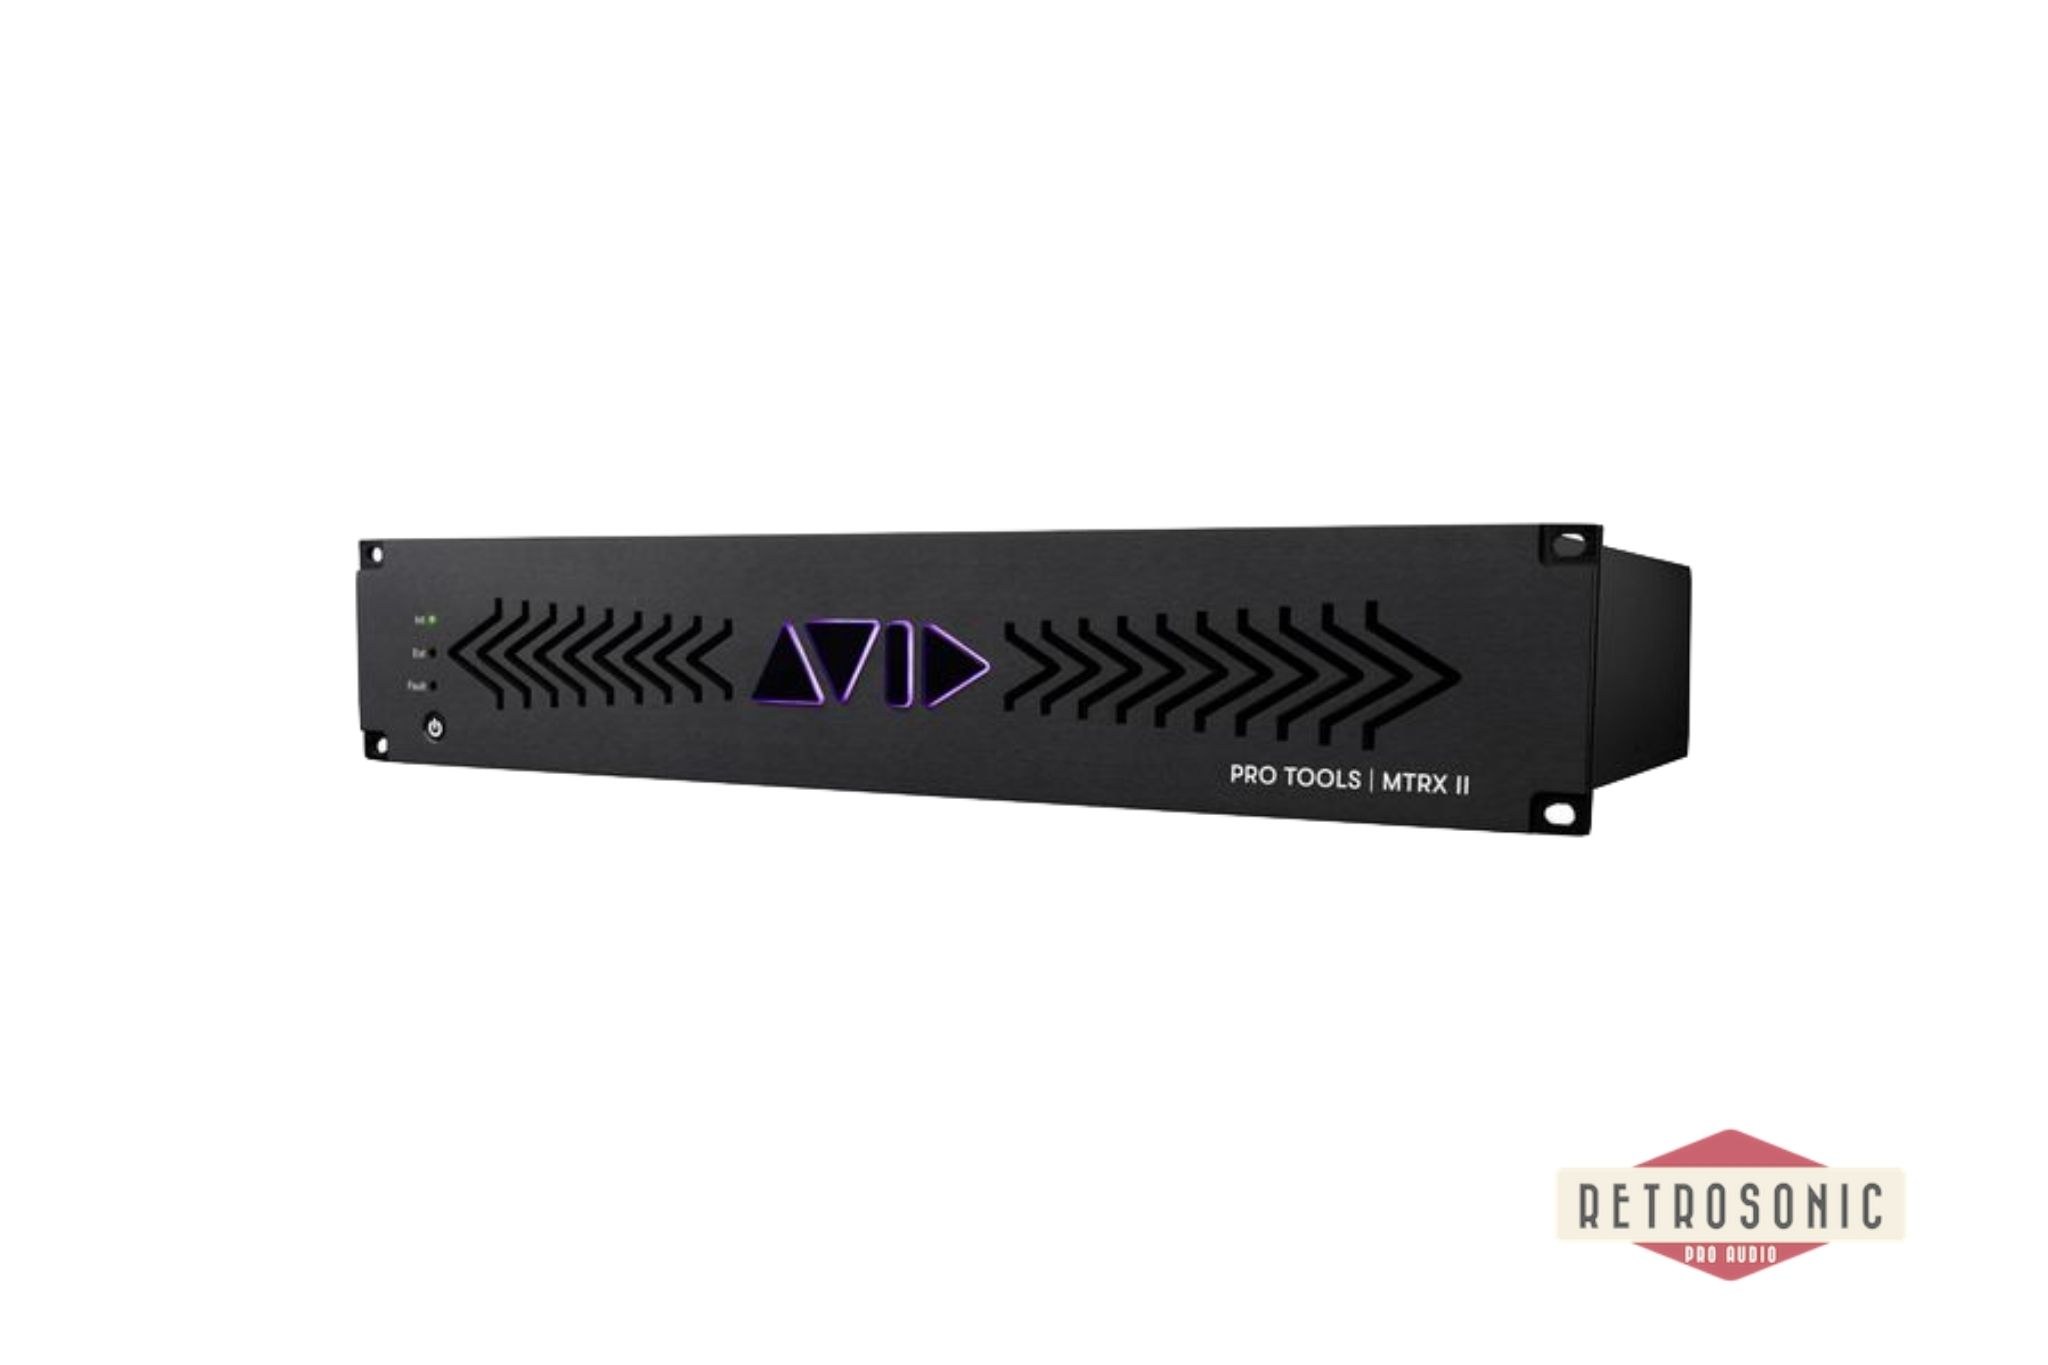 Avid Pro Tools | MTRX II Base unit with with DigiLink, Dante 256 and SPQ